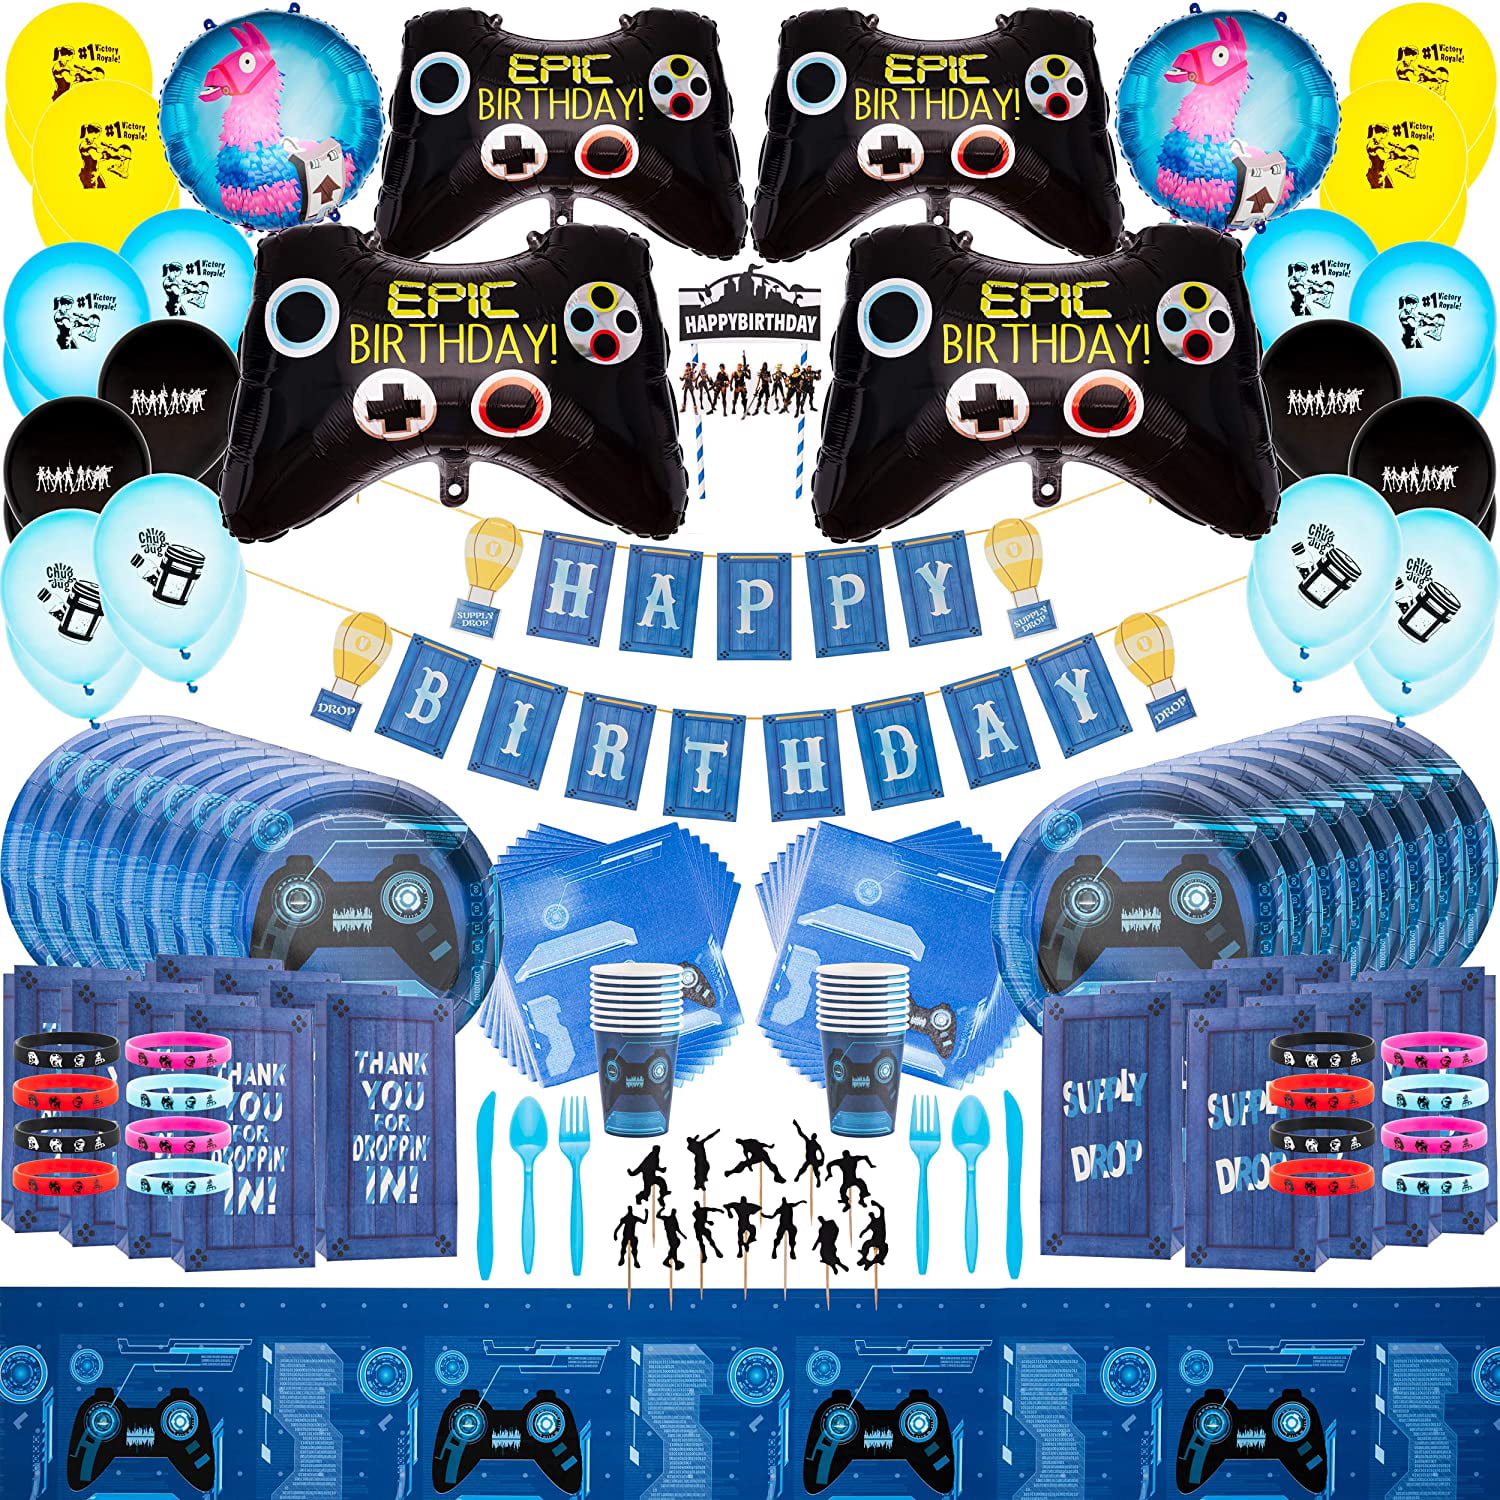 Video Game Party Supplies Kit Fortnite Inspired Complete Party Kit For Birthday Gaming Decorations Favors Cake Topper Plates Utensils Large Foil Controller Balloons With Printable Invitations Walmart Com Walmart Com